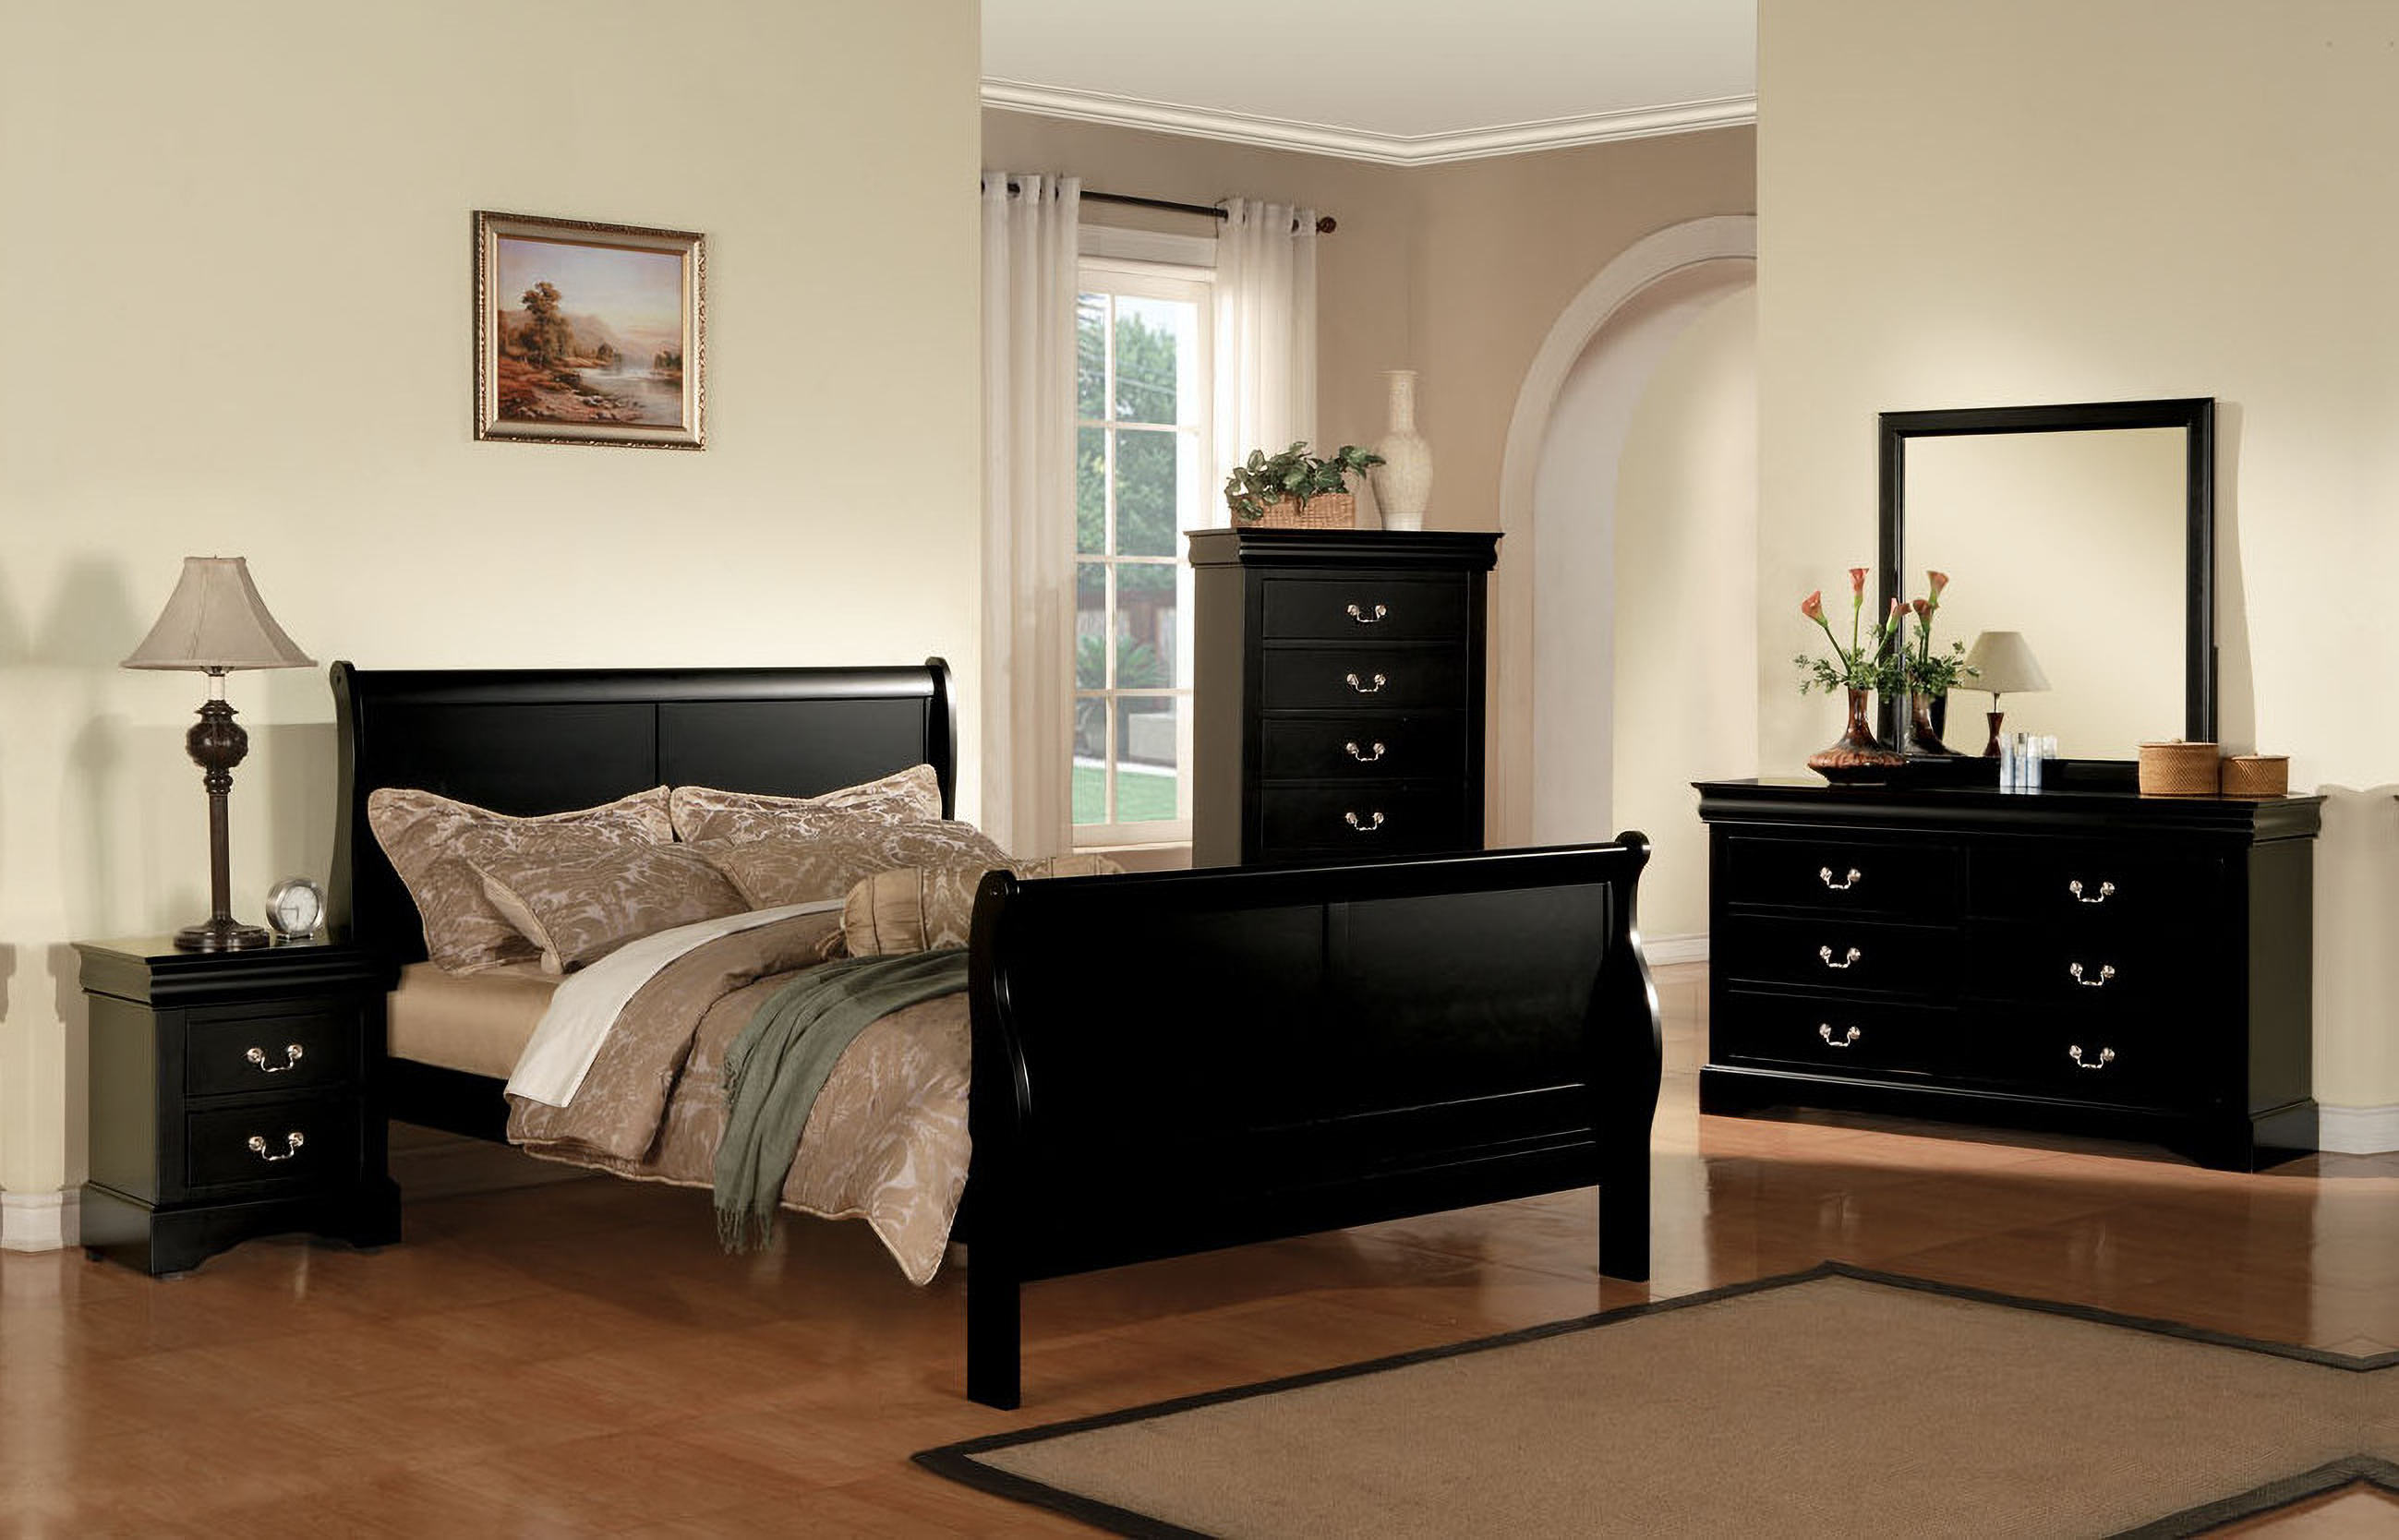 Louis Philippe Sleigh Bed - Queen with Black Finish by Coaster